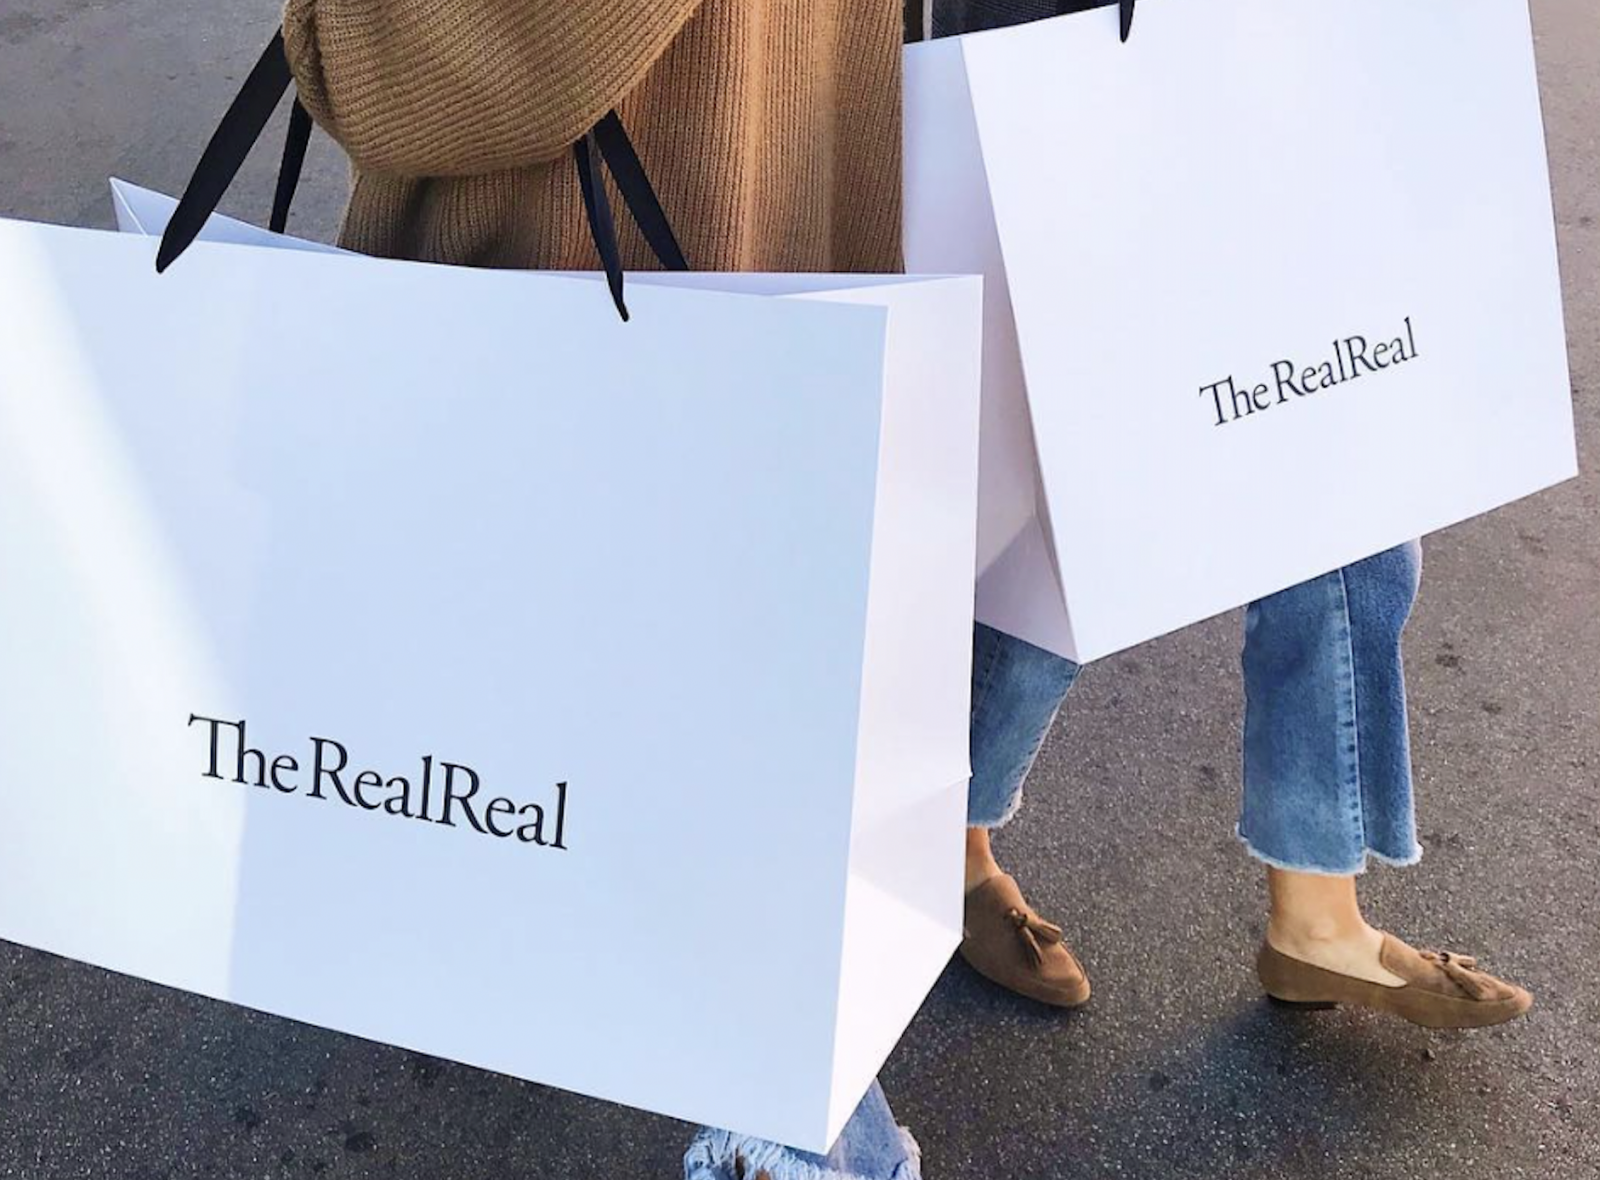 The RealReal fashion site wants to raise a new $100 million